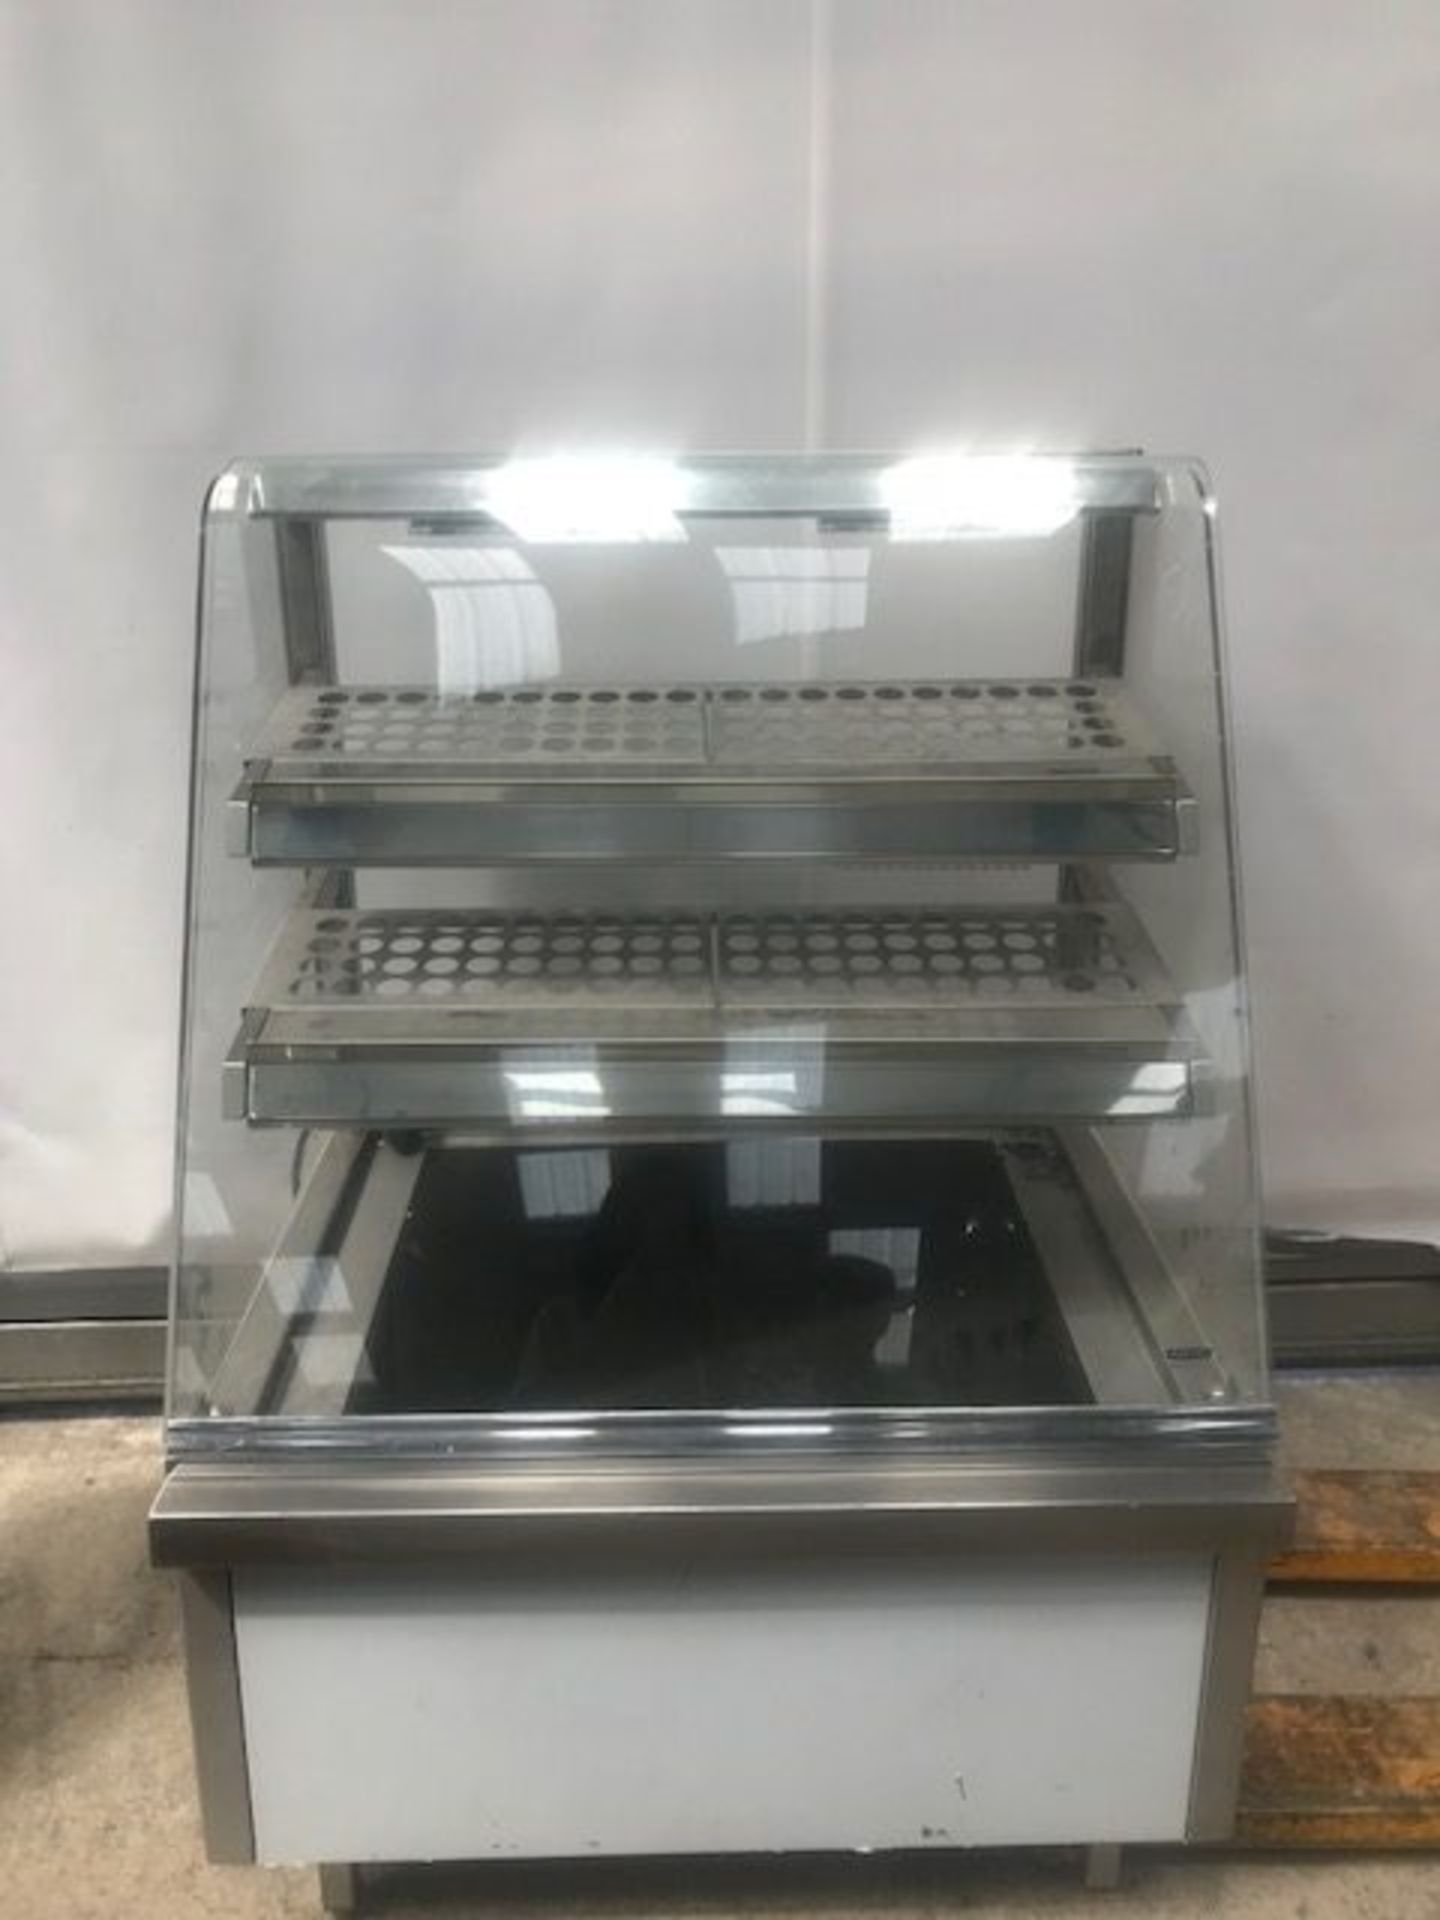 Moffat Heated Display Cabinet Heated display cabinet by Moffat perfect for keeping food hot and